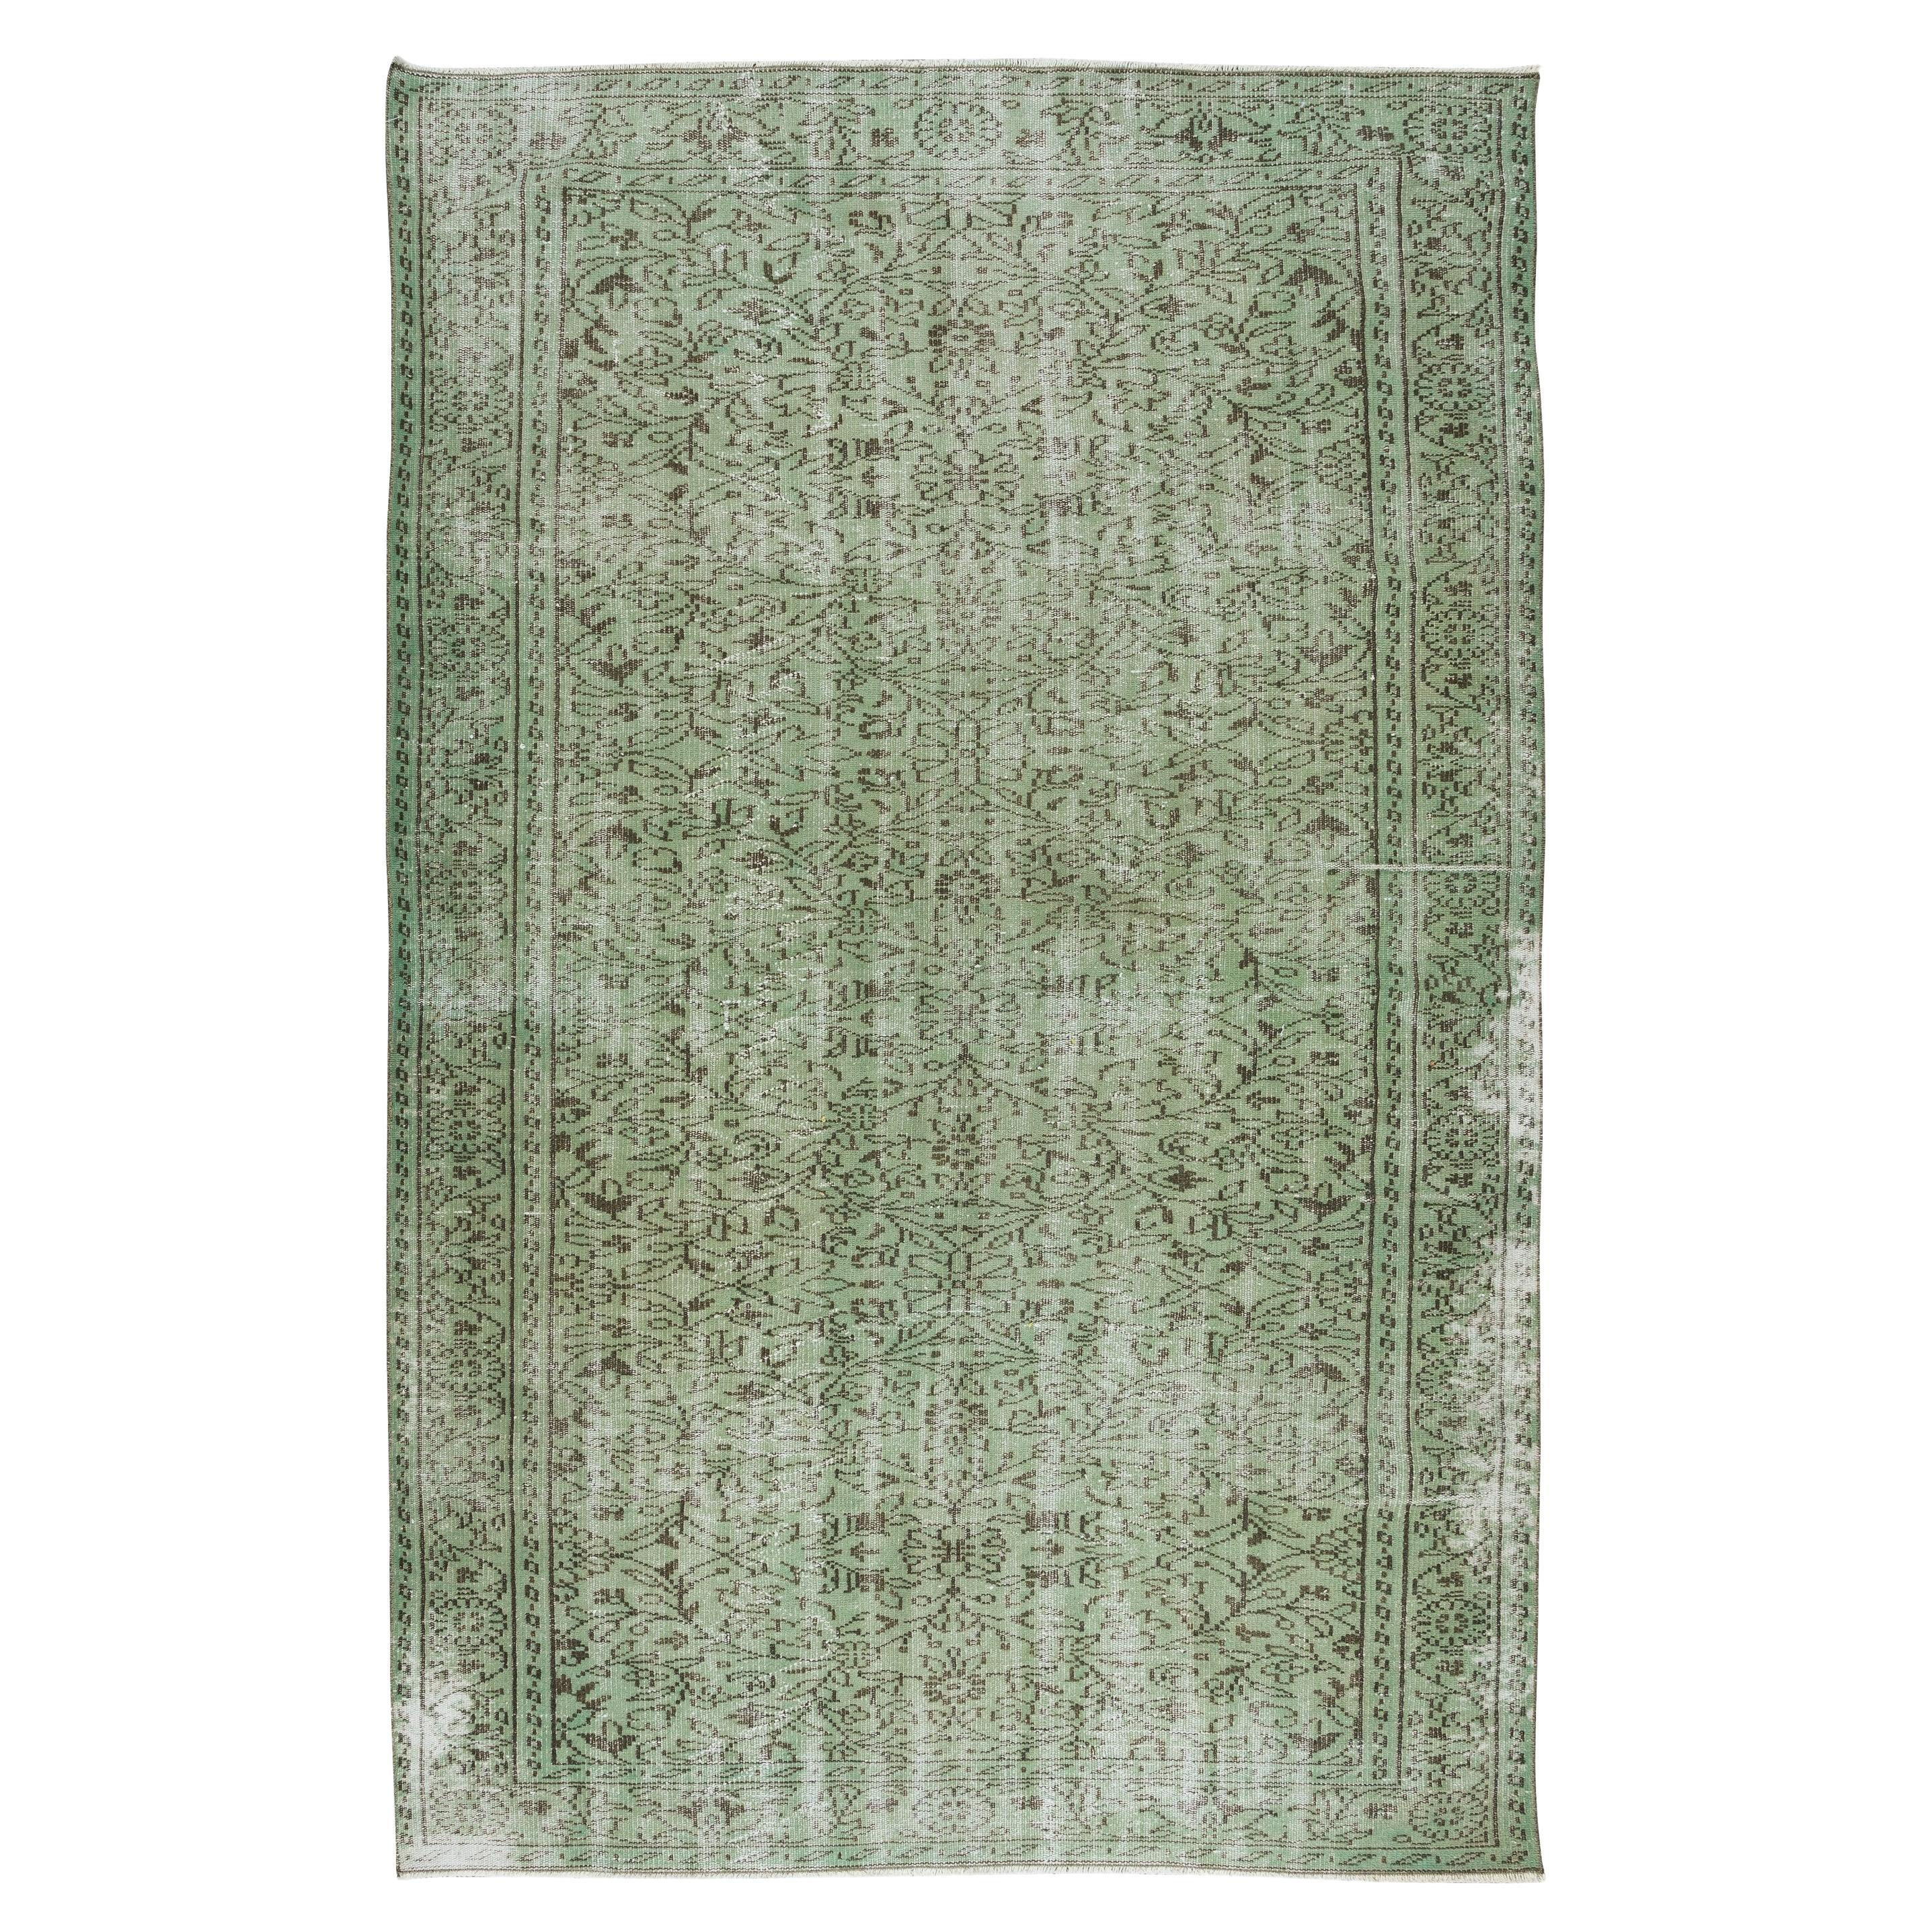 6x9.4 Ft Green Distressed Turkish Area Rug, Hand Knotted Vintage Wool Carpet For Sale